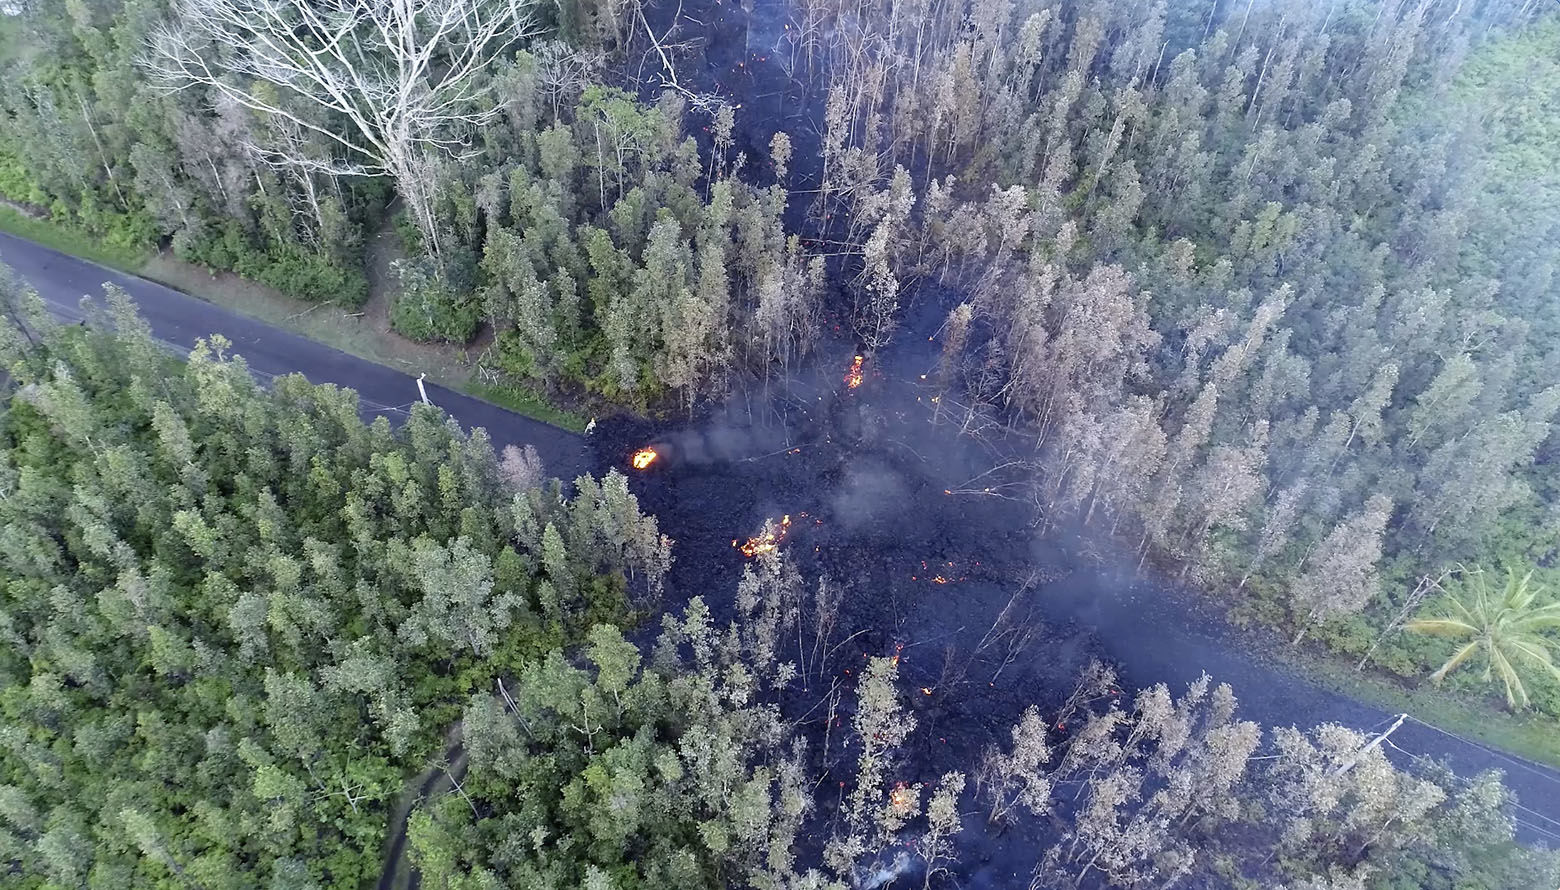 In this still frame taken from video, lava flows over a road in the Puna District as a result of the eruption from Kilauea Volcano on Hawaii's Big Island Friday, May 4, 2018. The eruption sent molten lava through forests and bubbling up from paved streets and forced the evacuation of about 1,500 people who were still out of their homes Friday after Thursday's eruption. (Byron Matthews via AP)